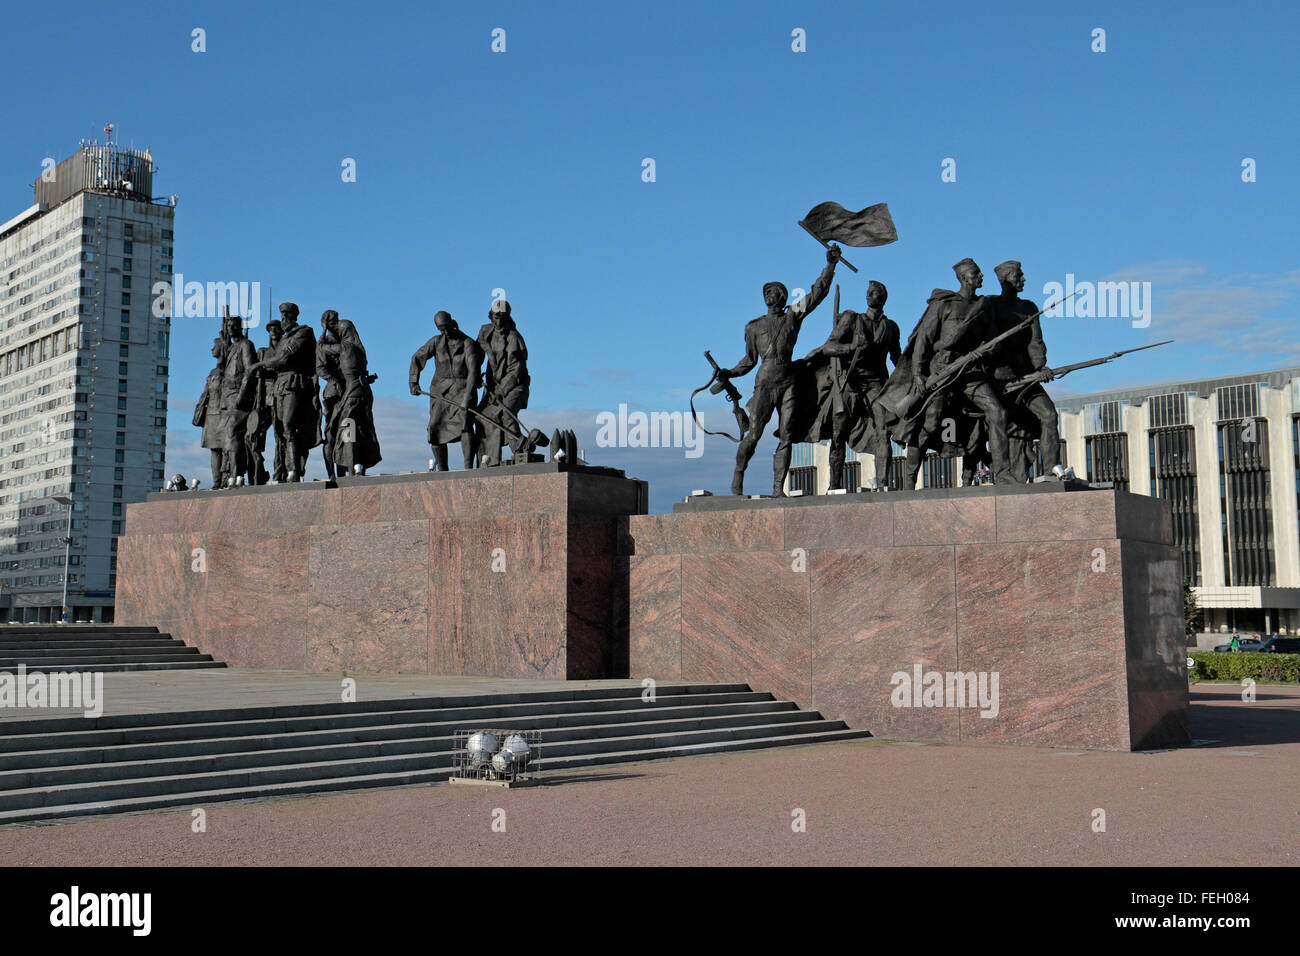 The Monument to the Heroic Defenders of Leningrad on Victory Square (Ploshchad Pobedy), St Petersburg, Northwestern, Russia. Stock Photo